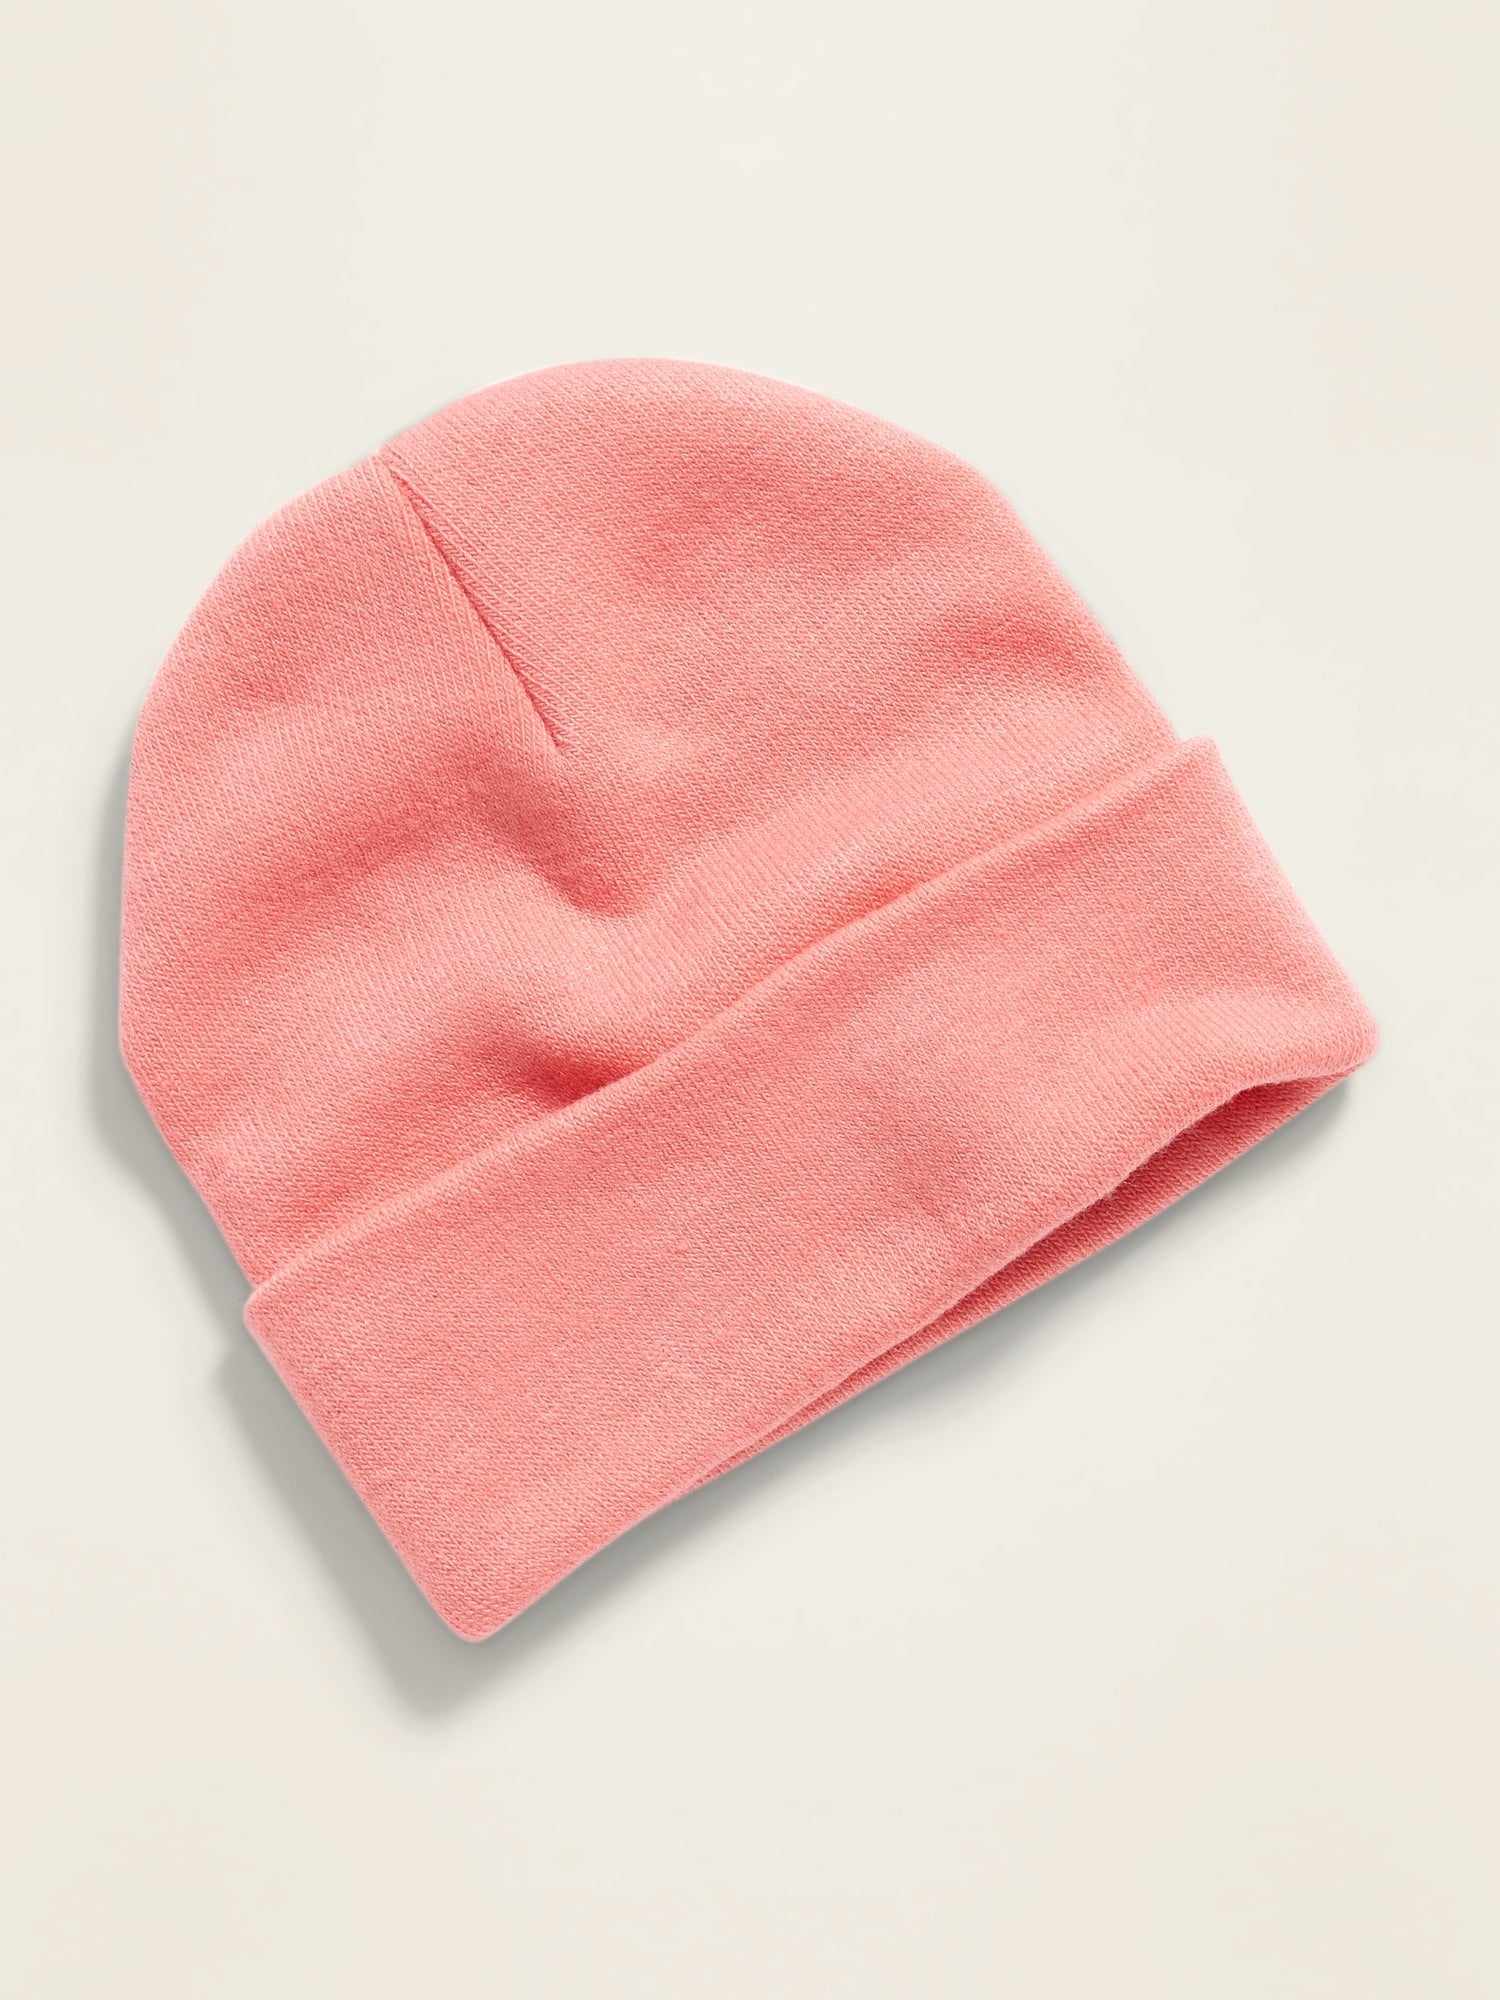 designer patched beanies — reworked vintage clothing and much more!